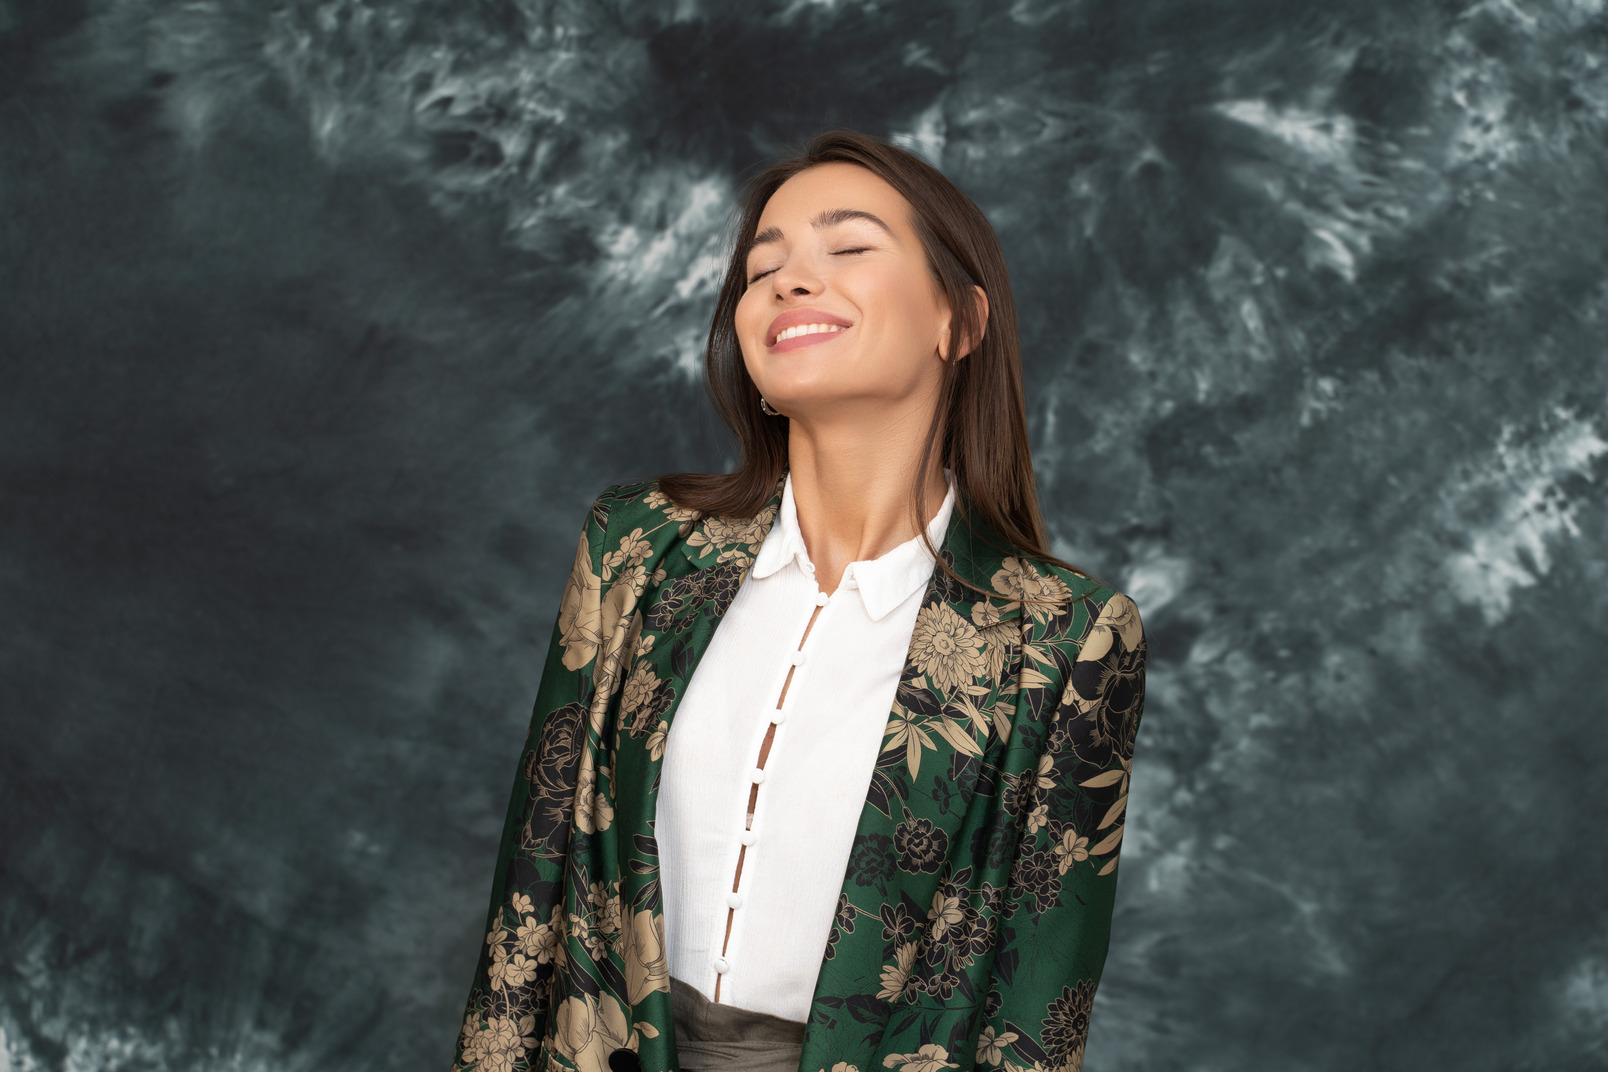 A woman in green japanese jacket smiles with her eyes closed